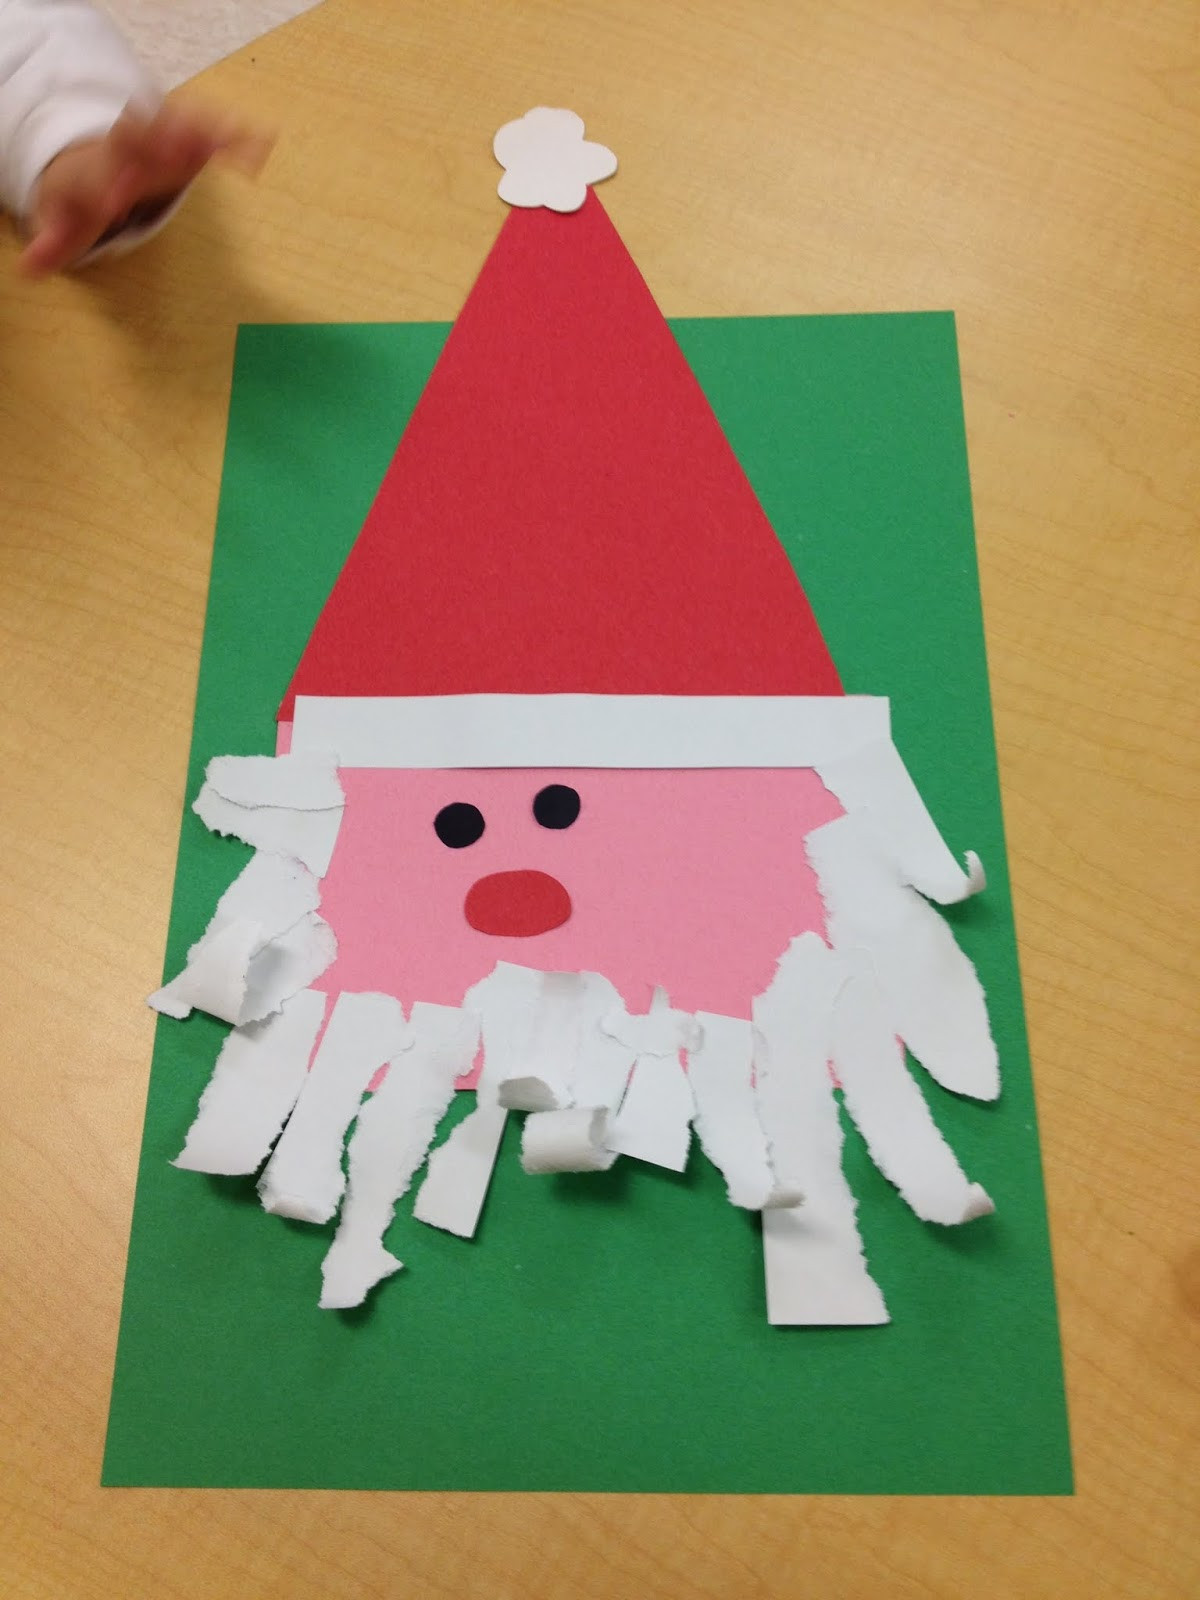 Christmas Arts And Crafts For Preschoolers
 Bonnie Kathryn Christmas Crafts